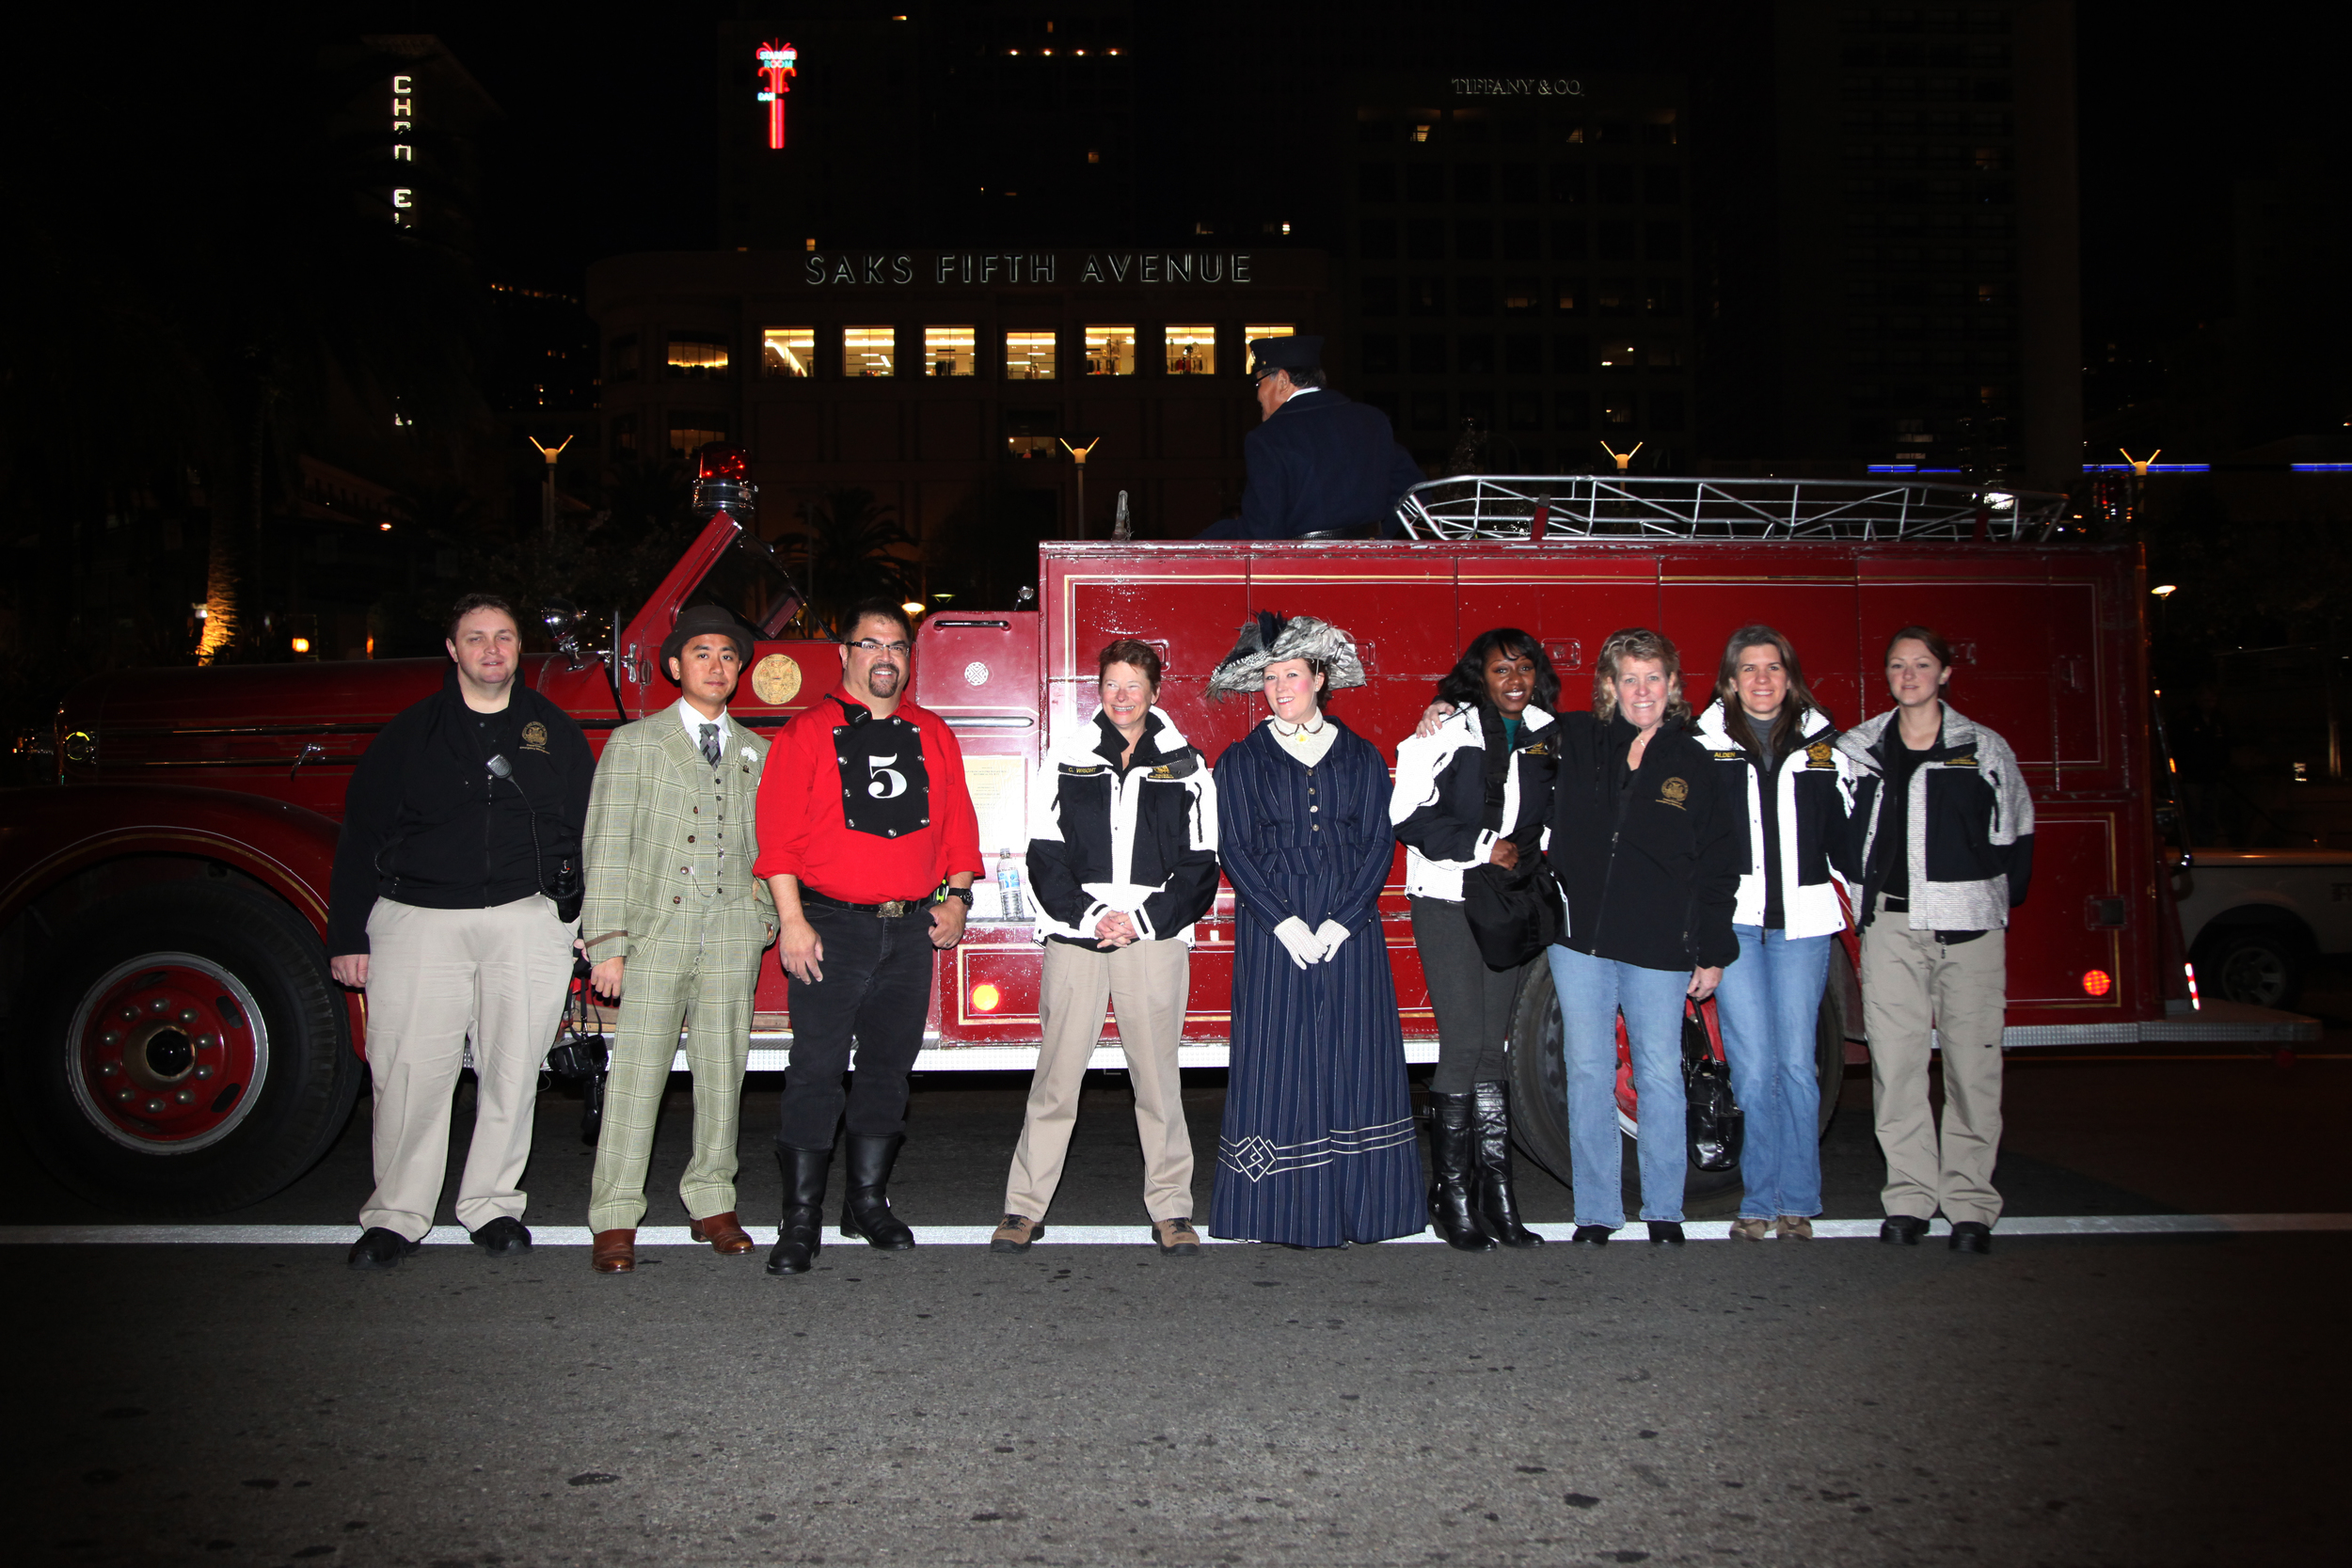 people in period dress next to firetruck